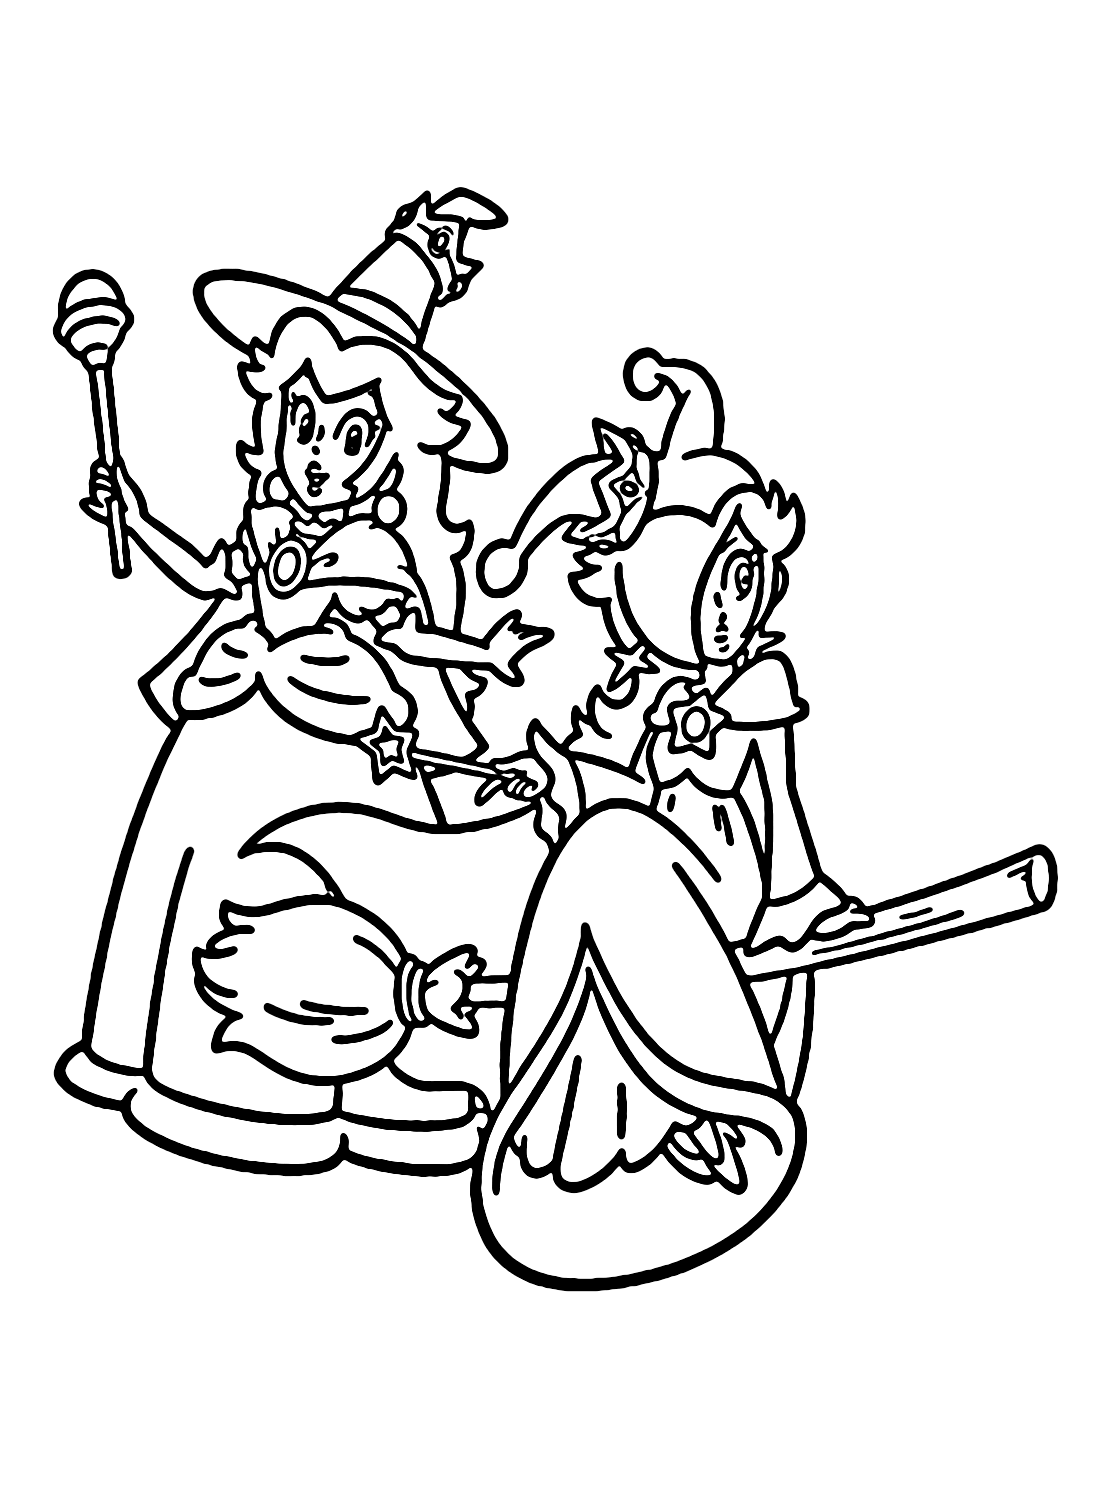 Rosalina Witch With Princess Peach Coloring Page